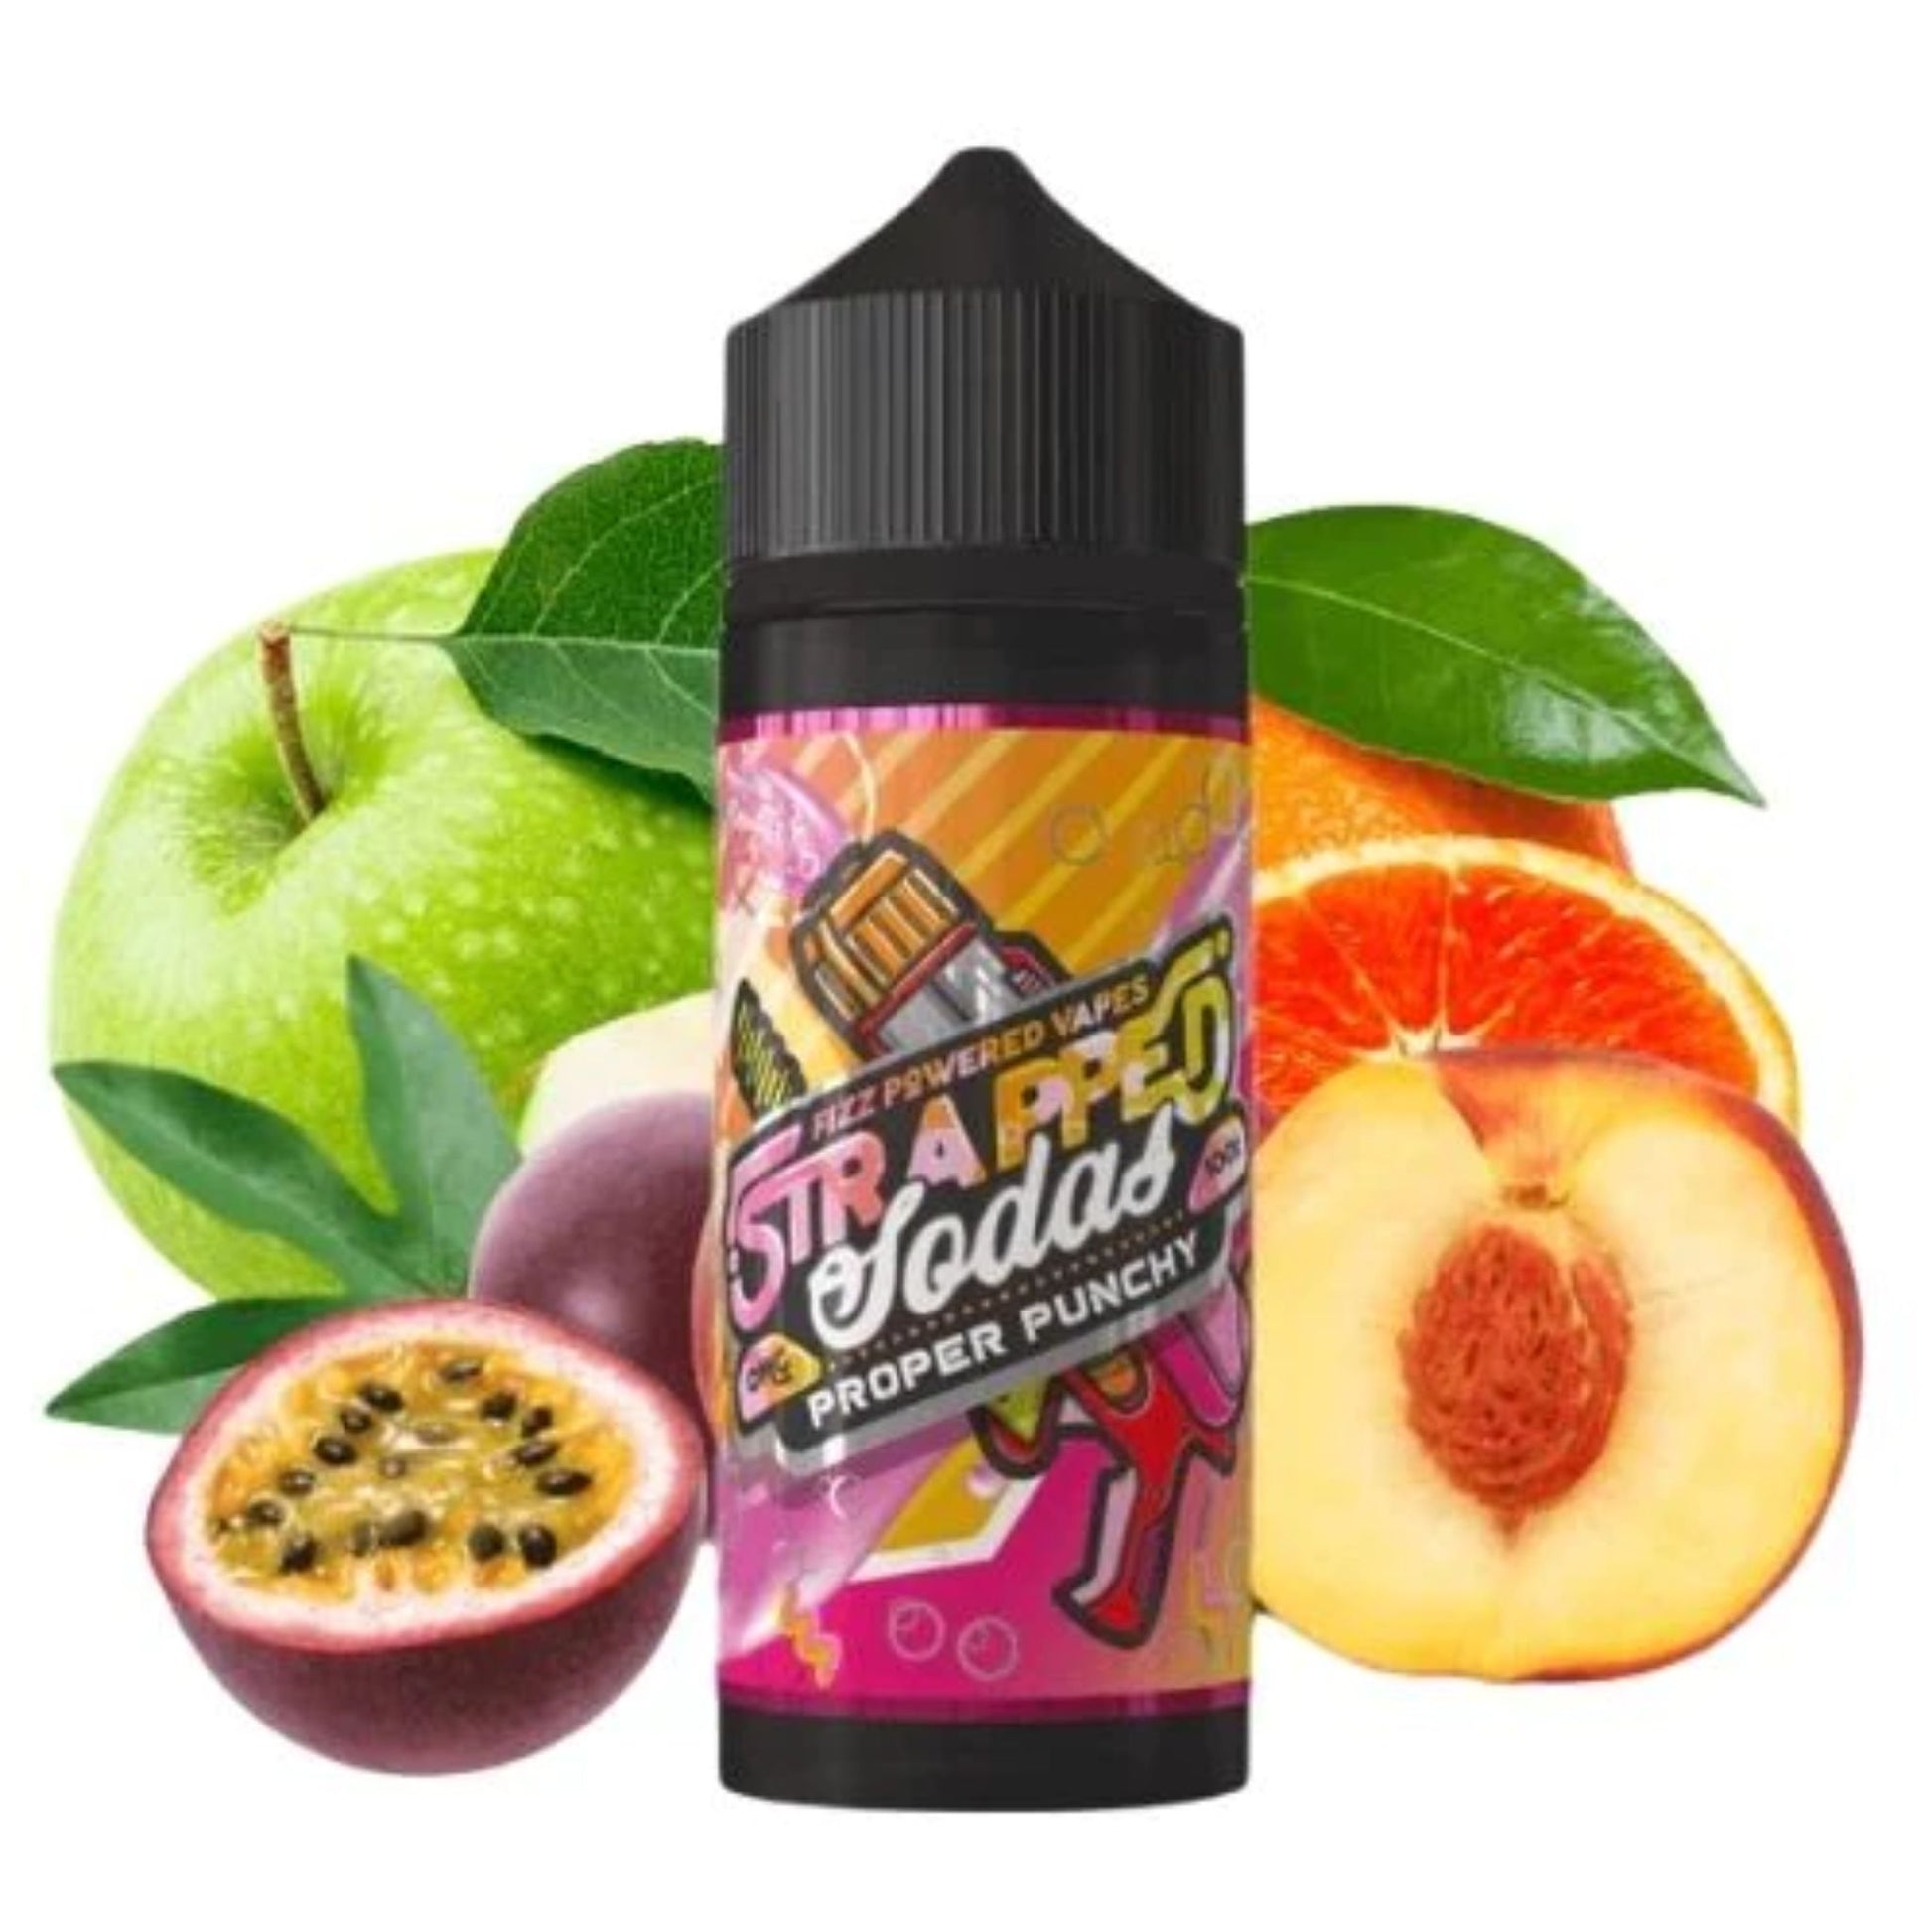 Strapped Sodas | Proper Punchy | 100ml bottle with halved passionfruit, peach and orange with whole green apple and orange